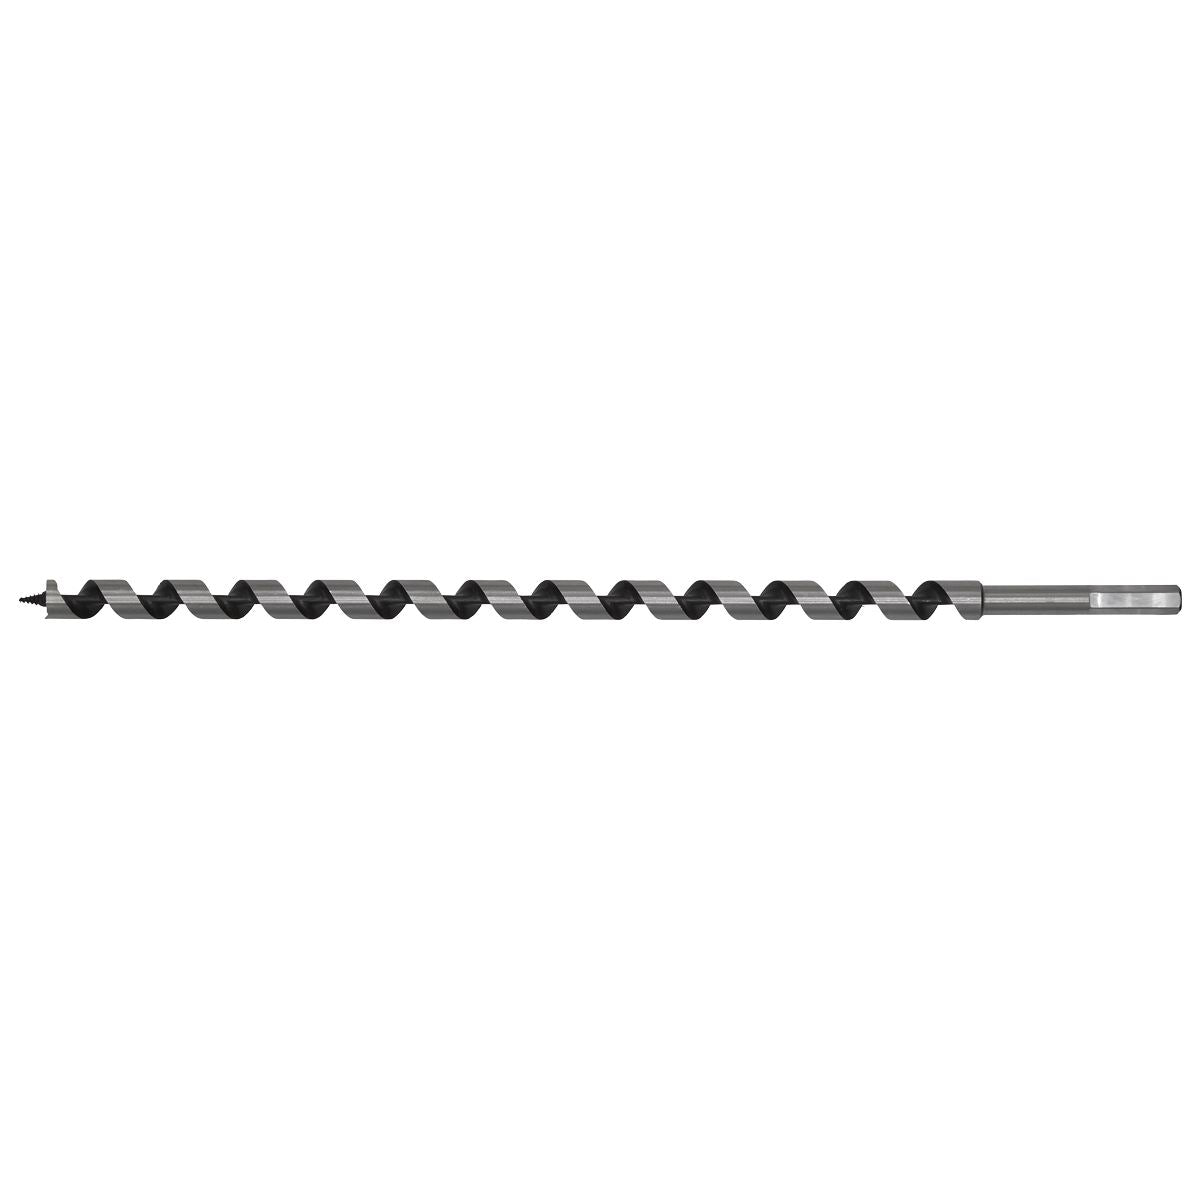 Worksafe by Sealey Auger Wood Drill Bit 16mm x 460mm